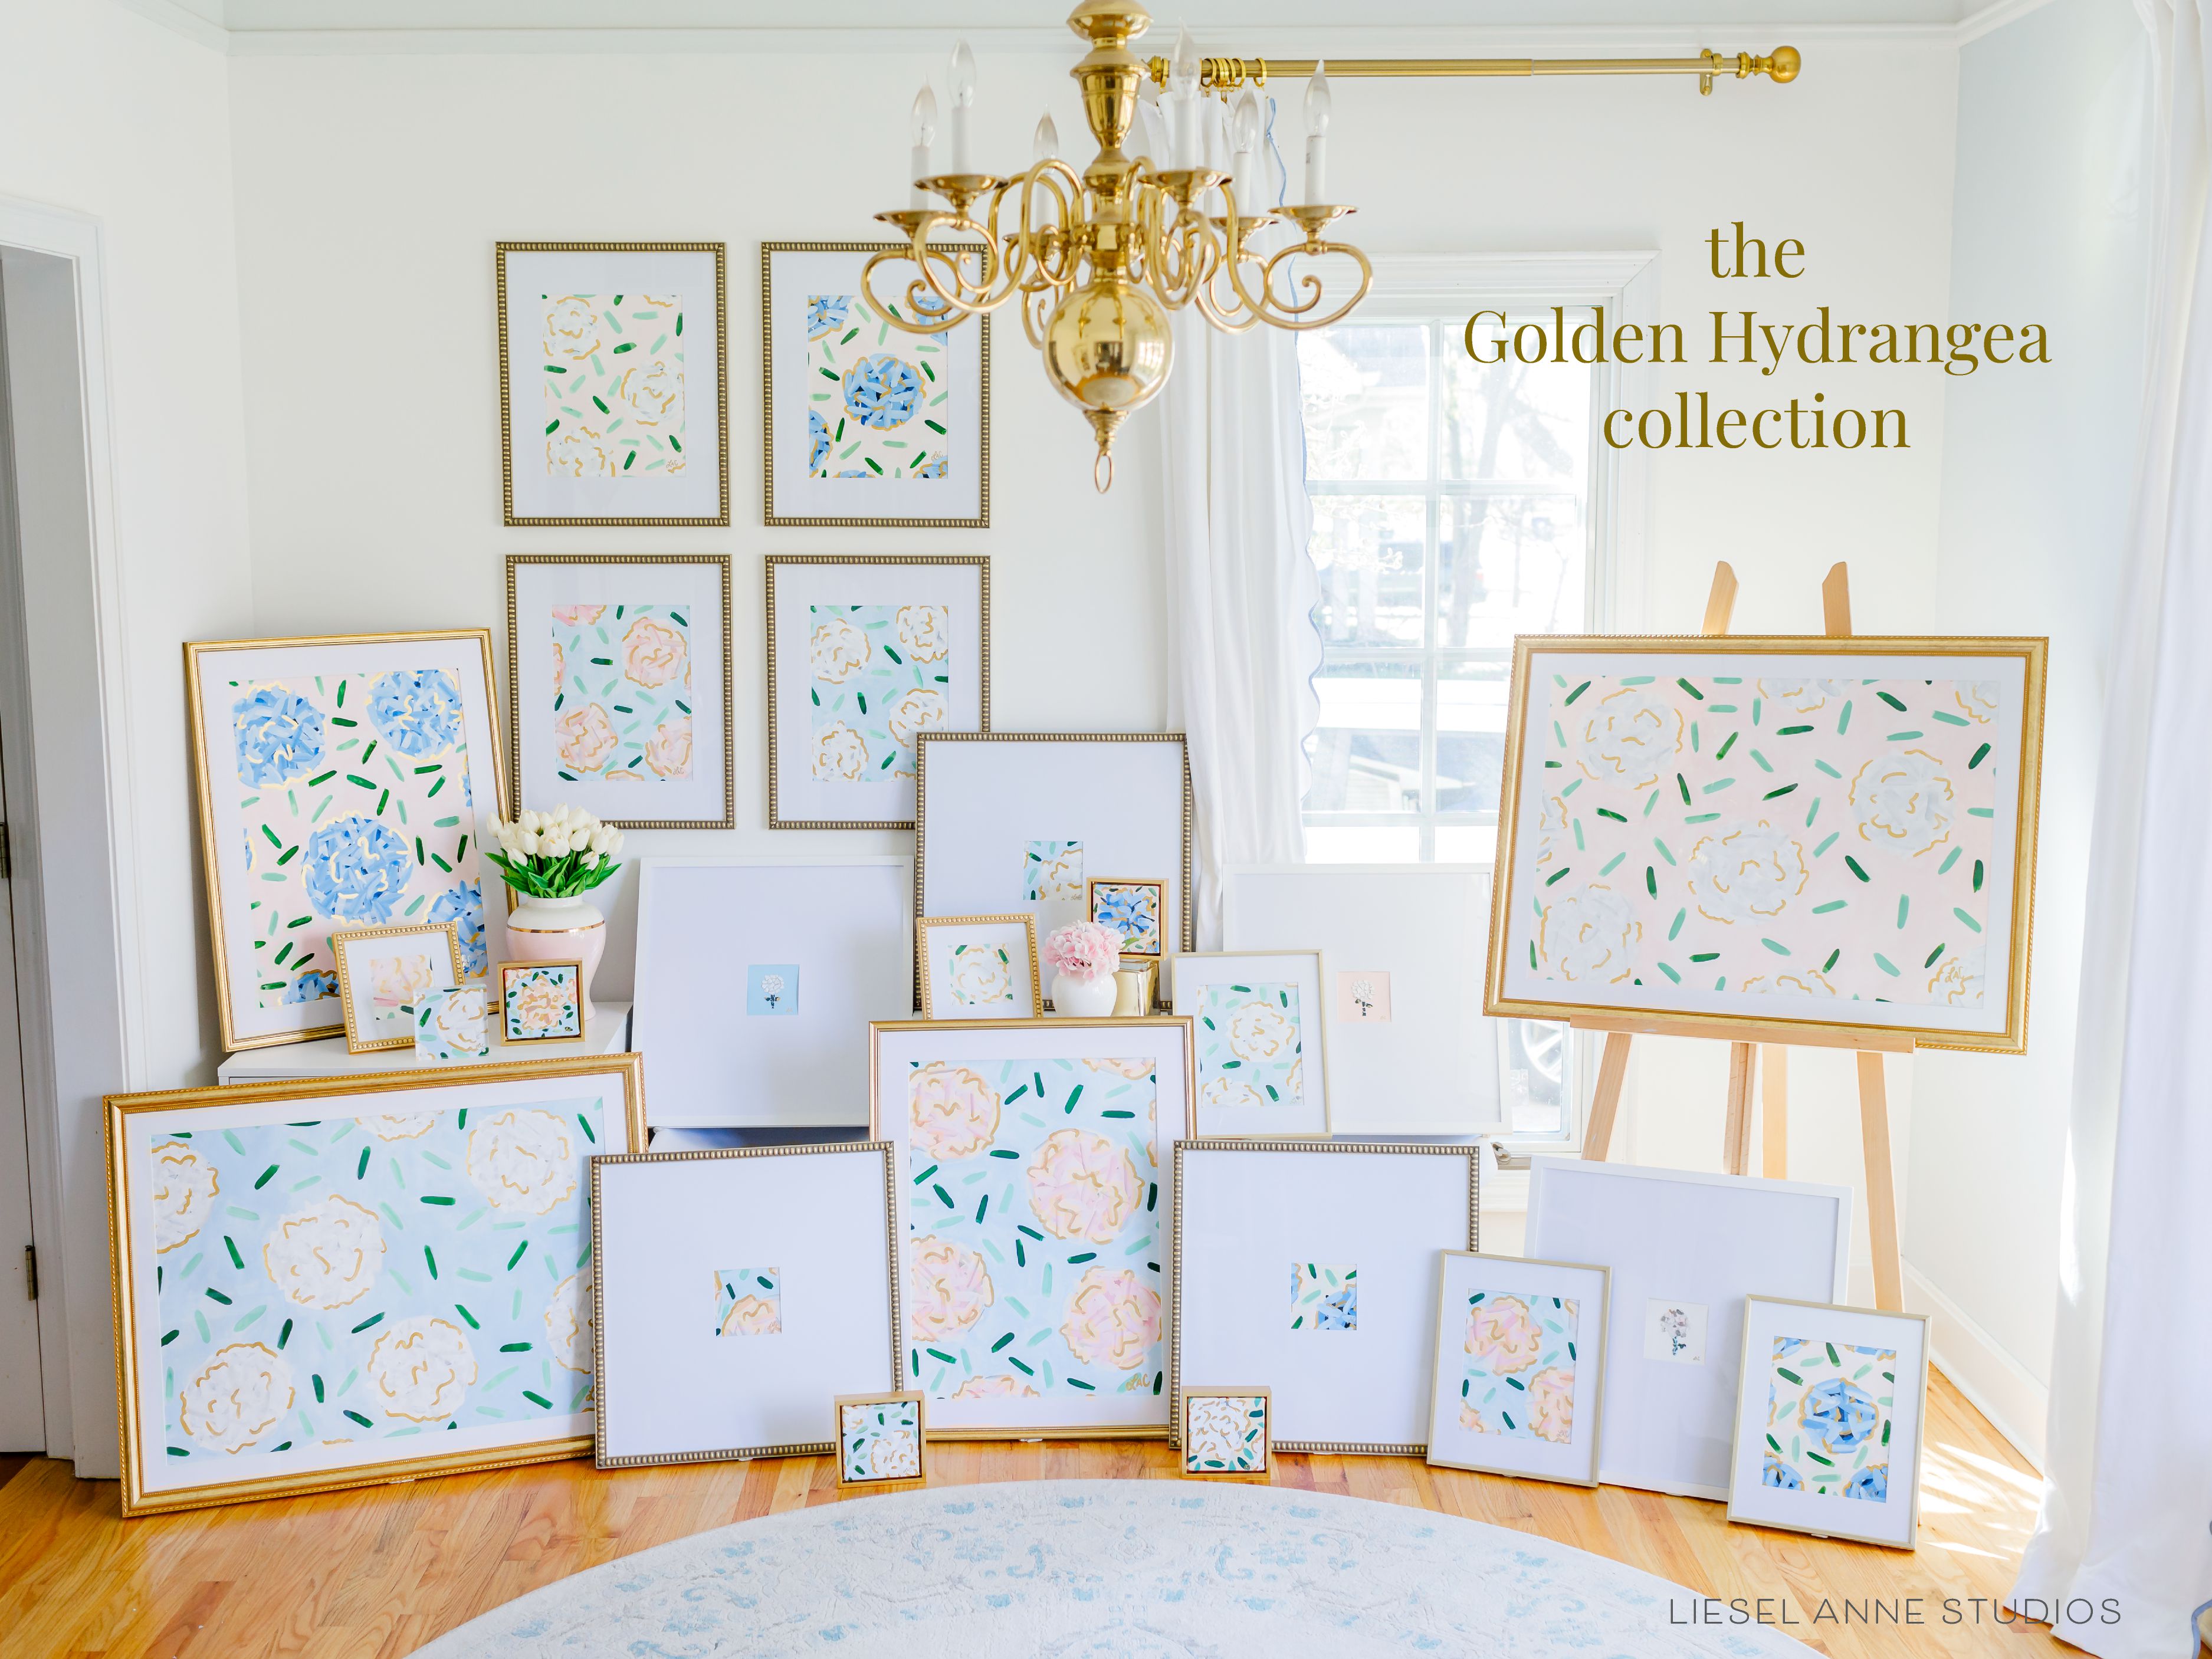 Golden Hydrangea | Blush & Blue VII-Original artwork measures 11"x14" | Hand-Painted with gouache on cold press watercolor paper | Matted and framed in gold wood frame sized 16"x20" | Glare-resistant glass | Hanging hardware included | Features our signature Golden Hydrangea design with a pale pink base, blue hydrangeas and shimmery gold accents | Initialed in gold by the Liesel Anne (the artist) on the front and signed and dated on the back.-The Singing Little Bird